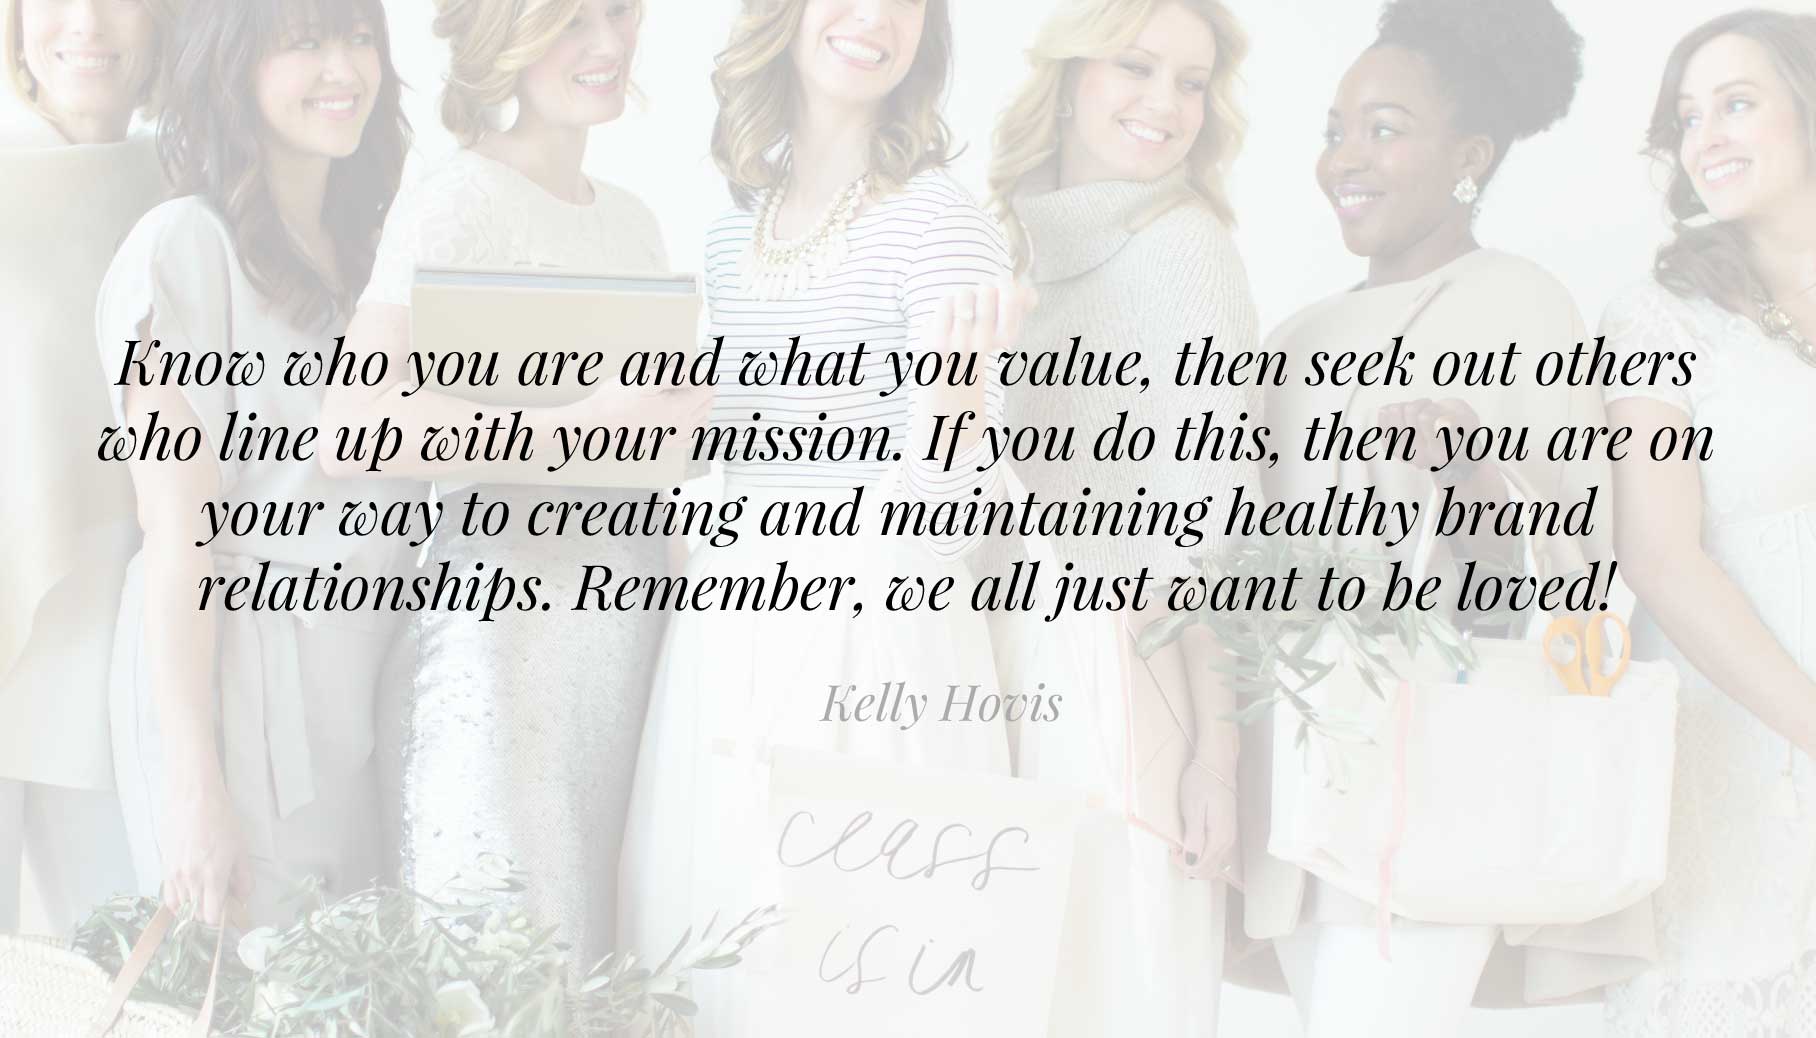   Written by  Kelly Hovis   | Brand Partnerships | Entrepreneur advice | The School of Styling -  theschoolofstyling.com  